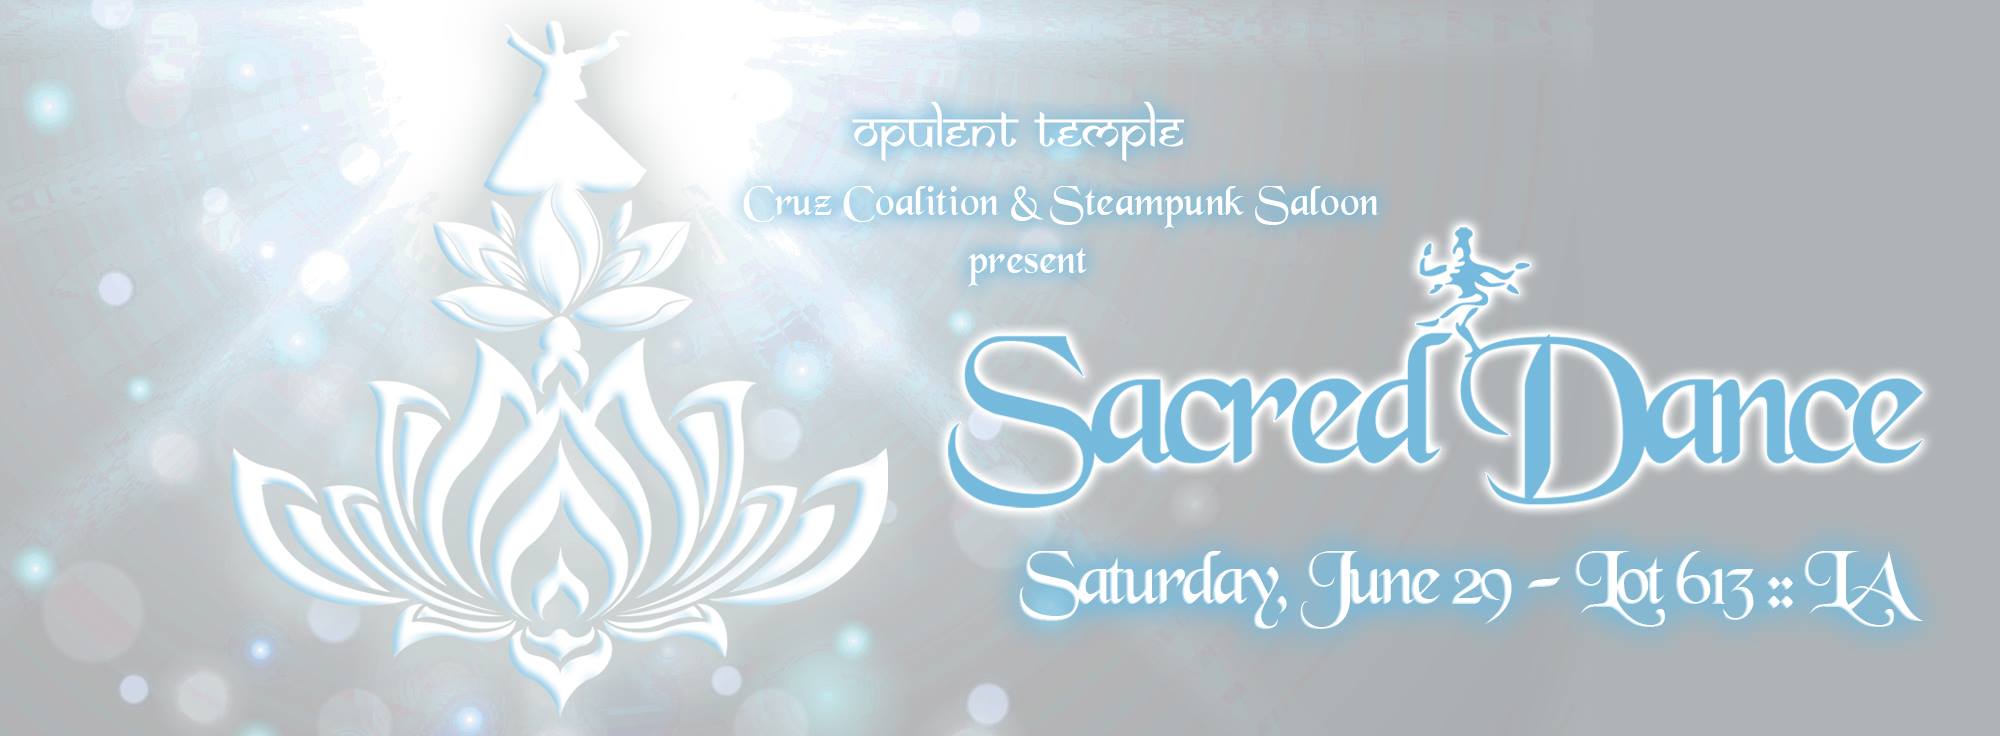 Our Annual Sacred Dance ‘White Party’ in LA 2013